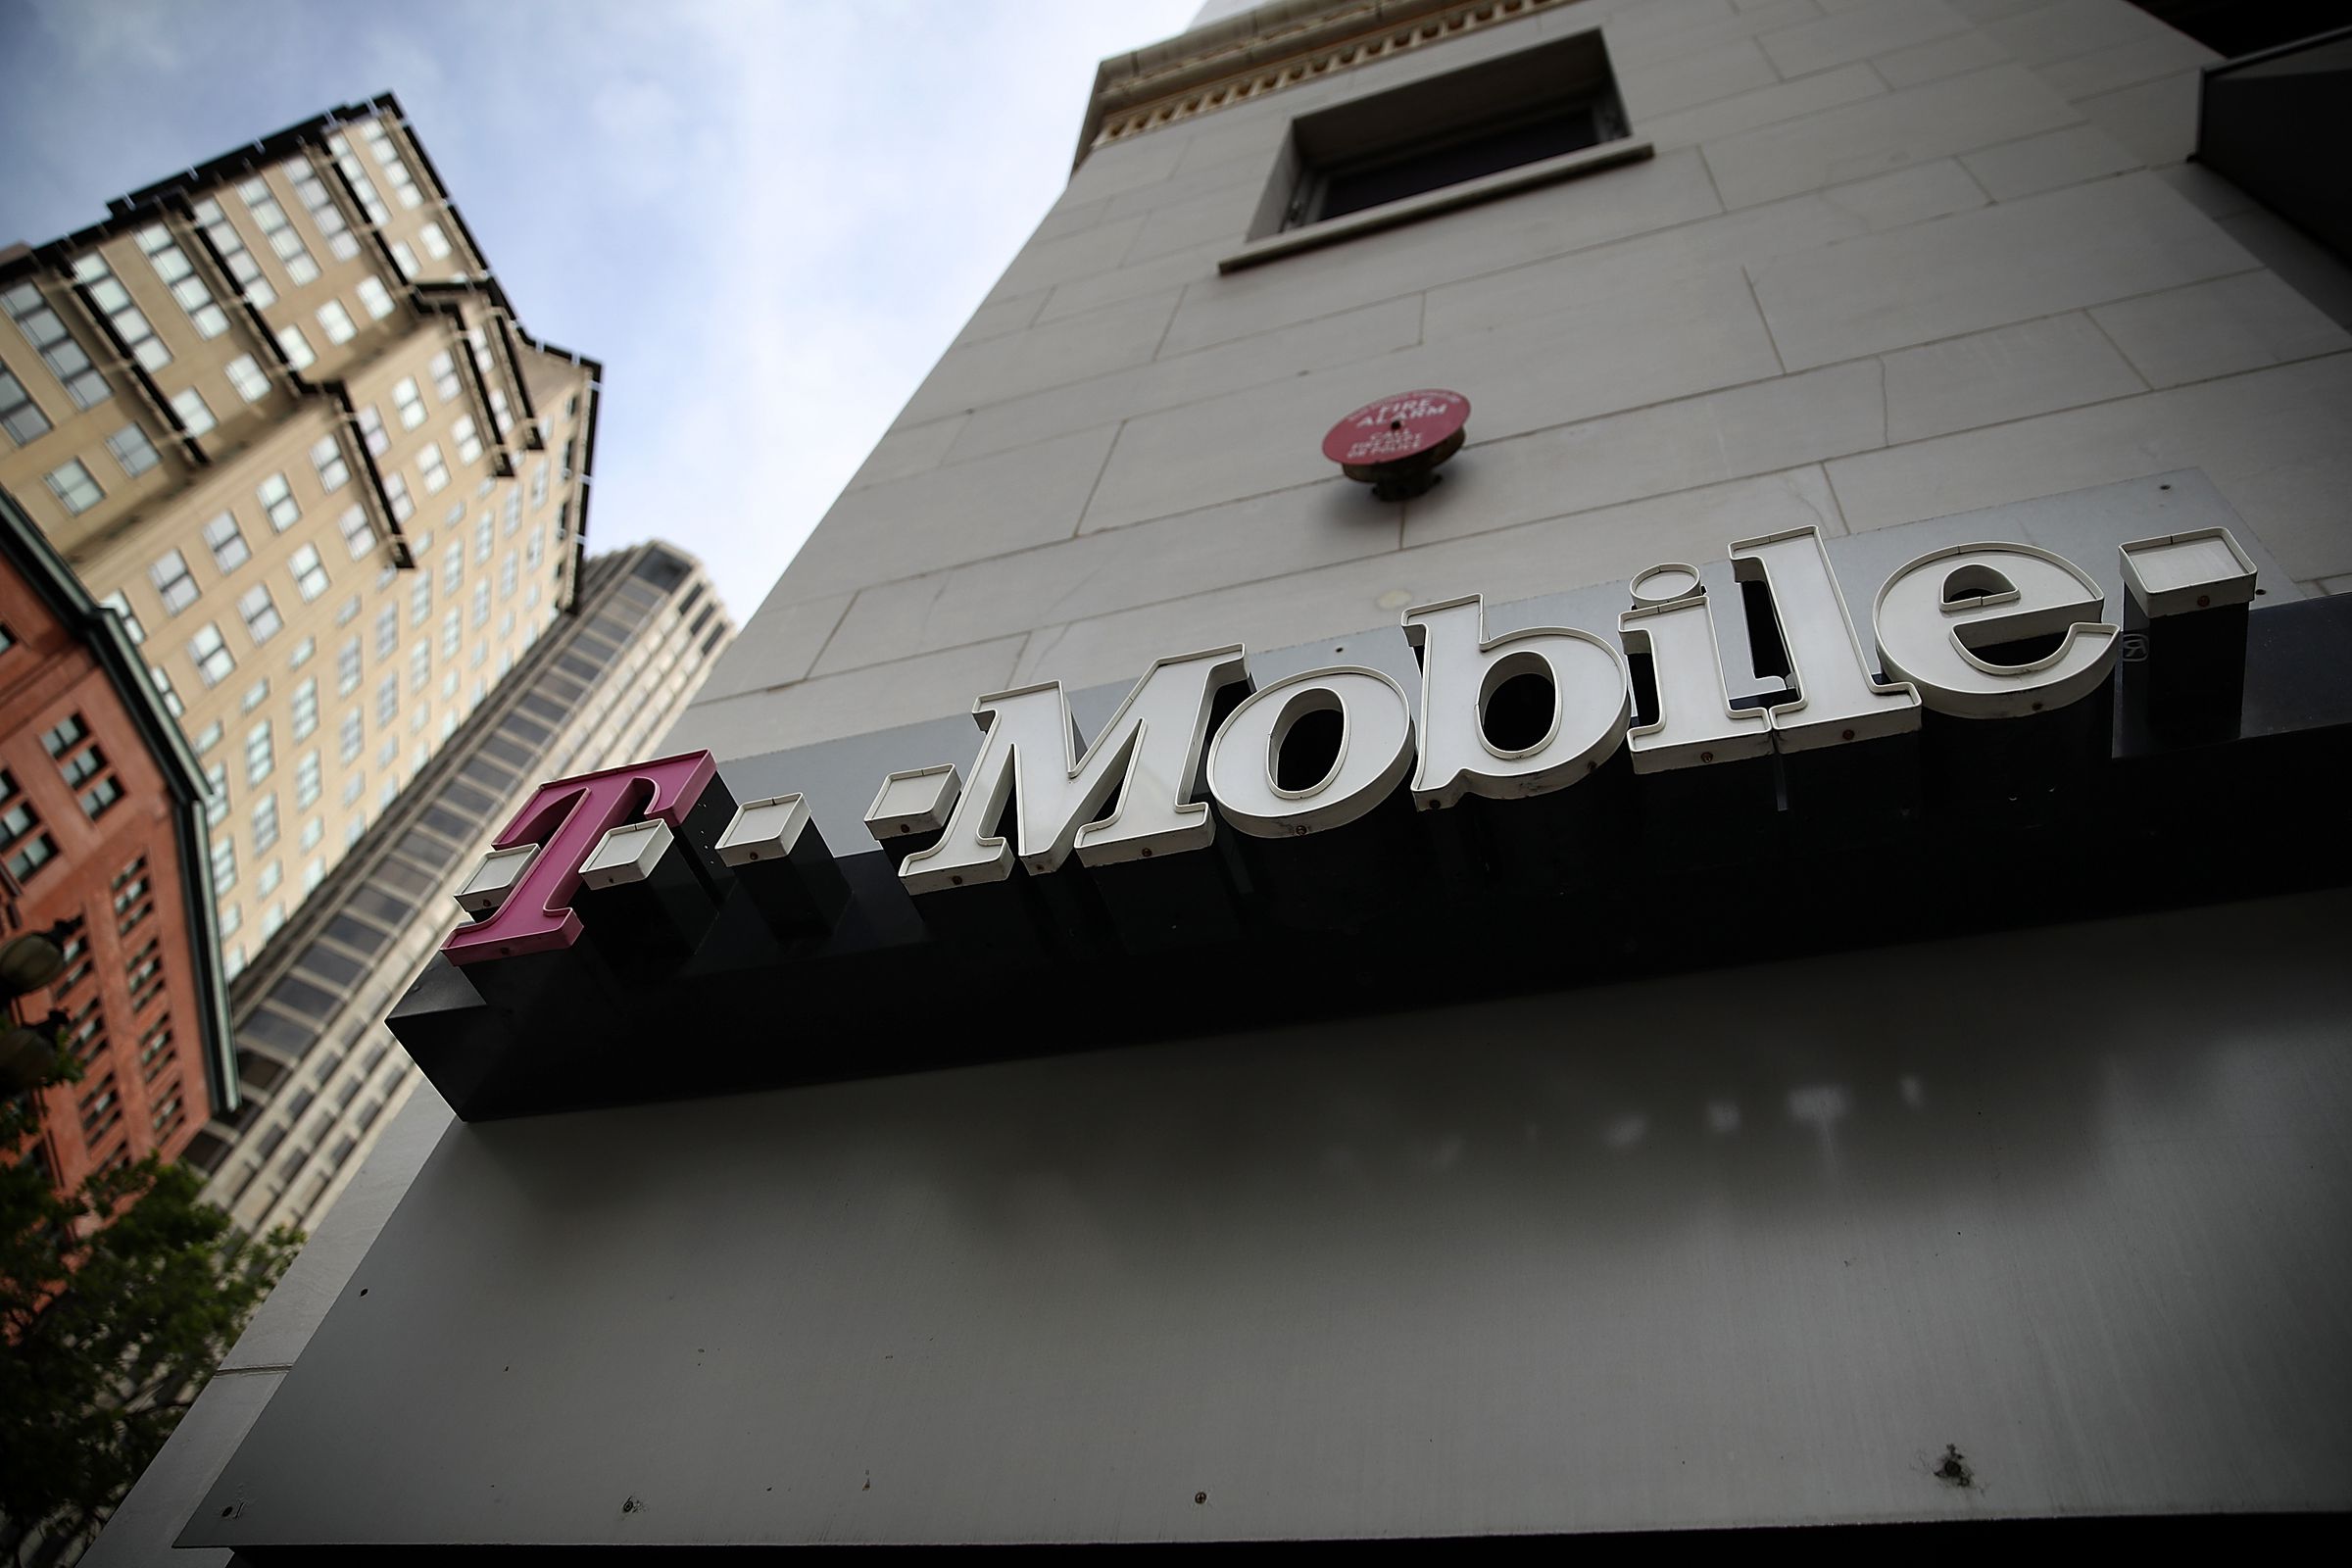 T-Mobile Announces First Quarter Earning Results